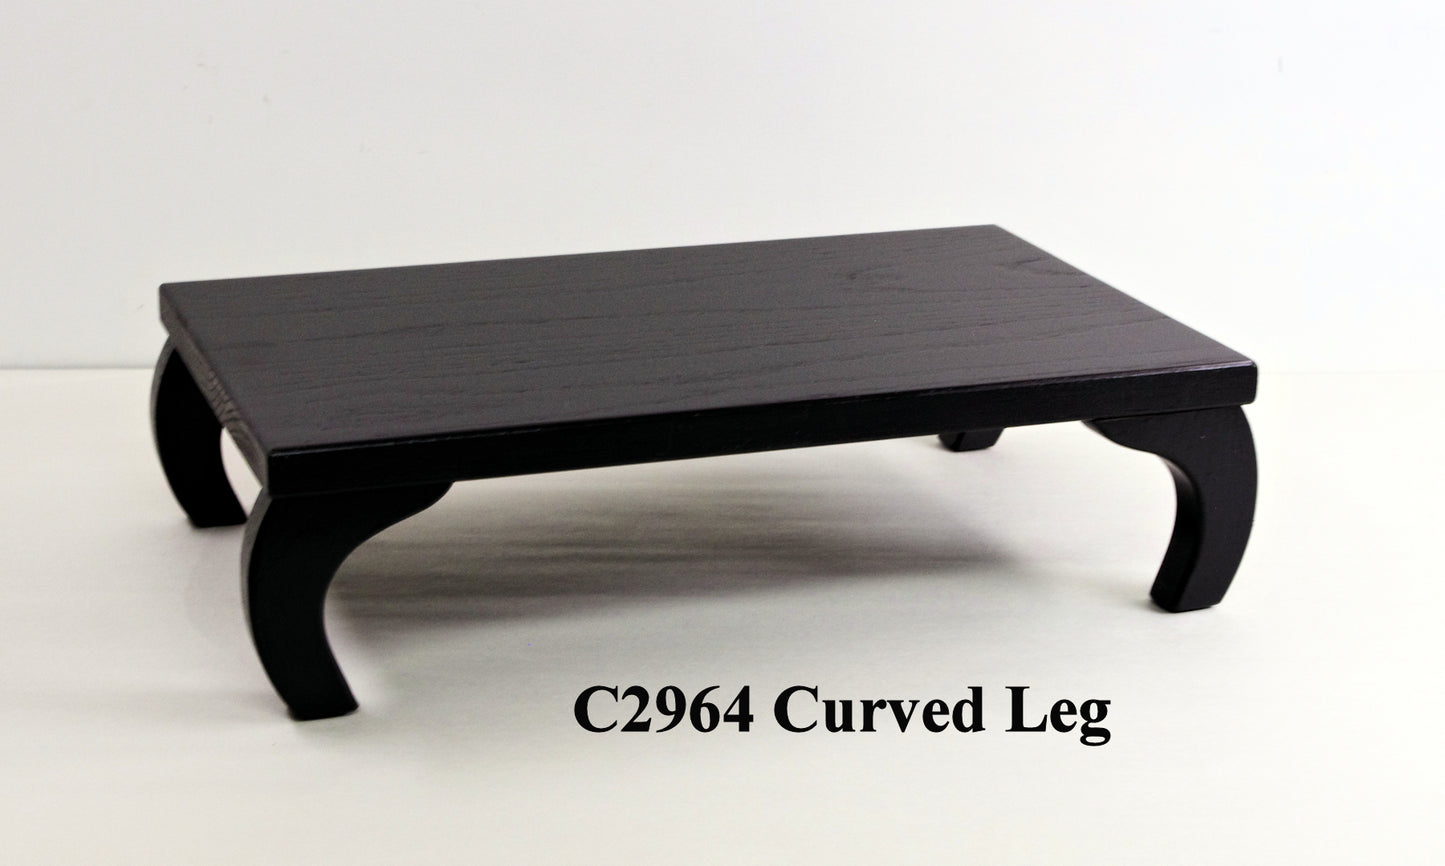 Bonsai Stand Curved Leg C2964 Made to Order 14" Length